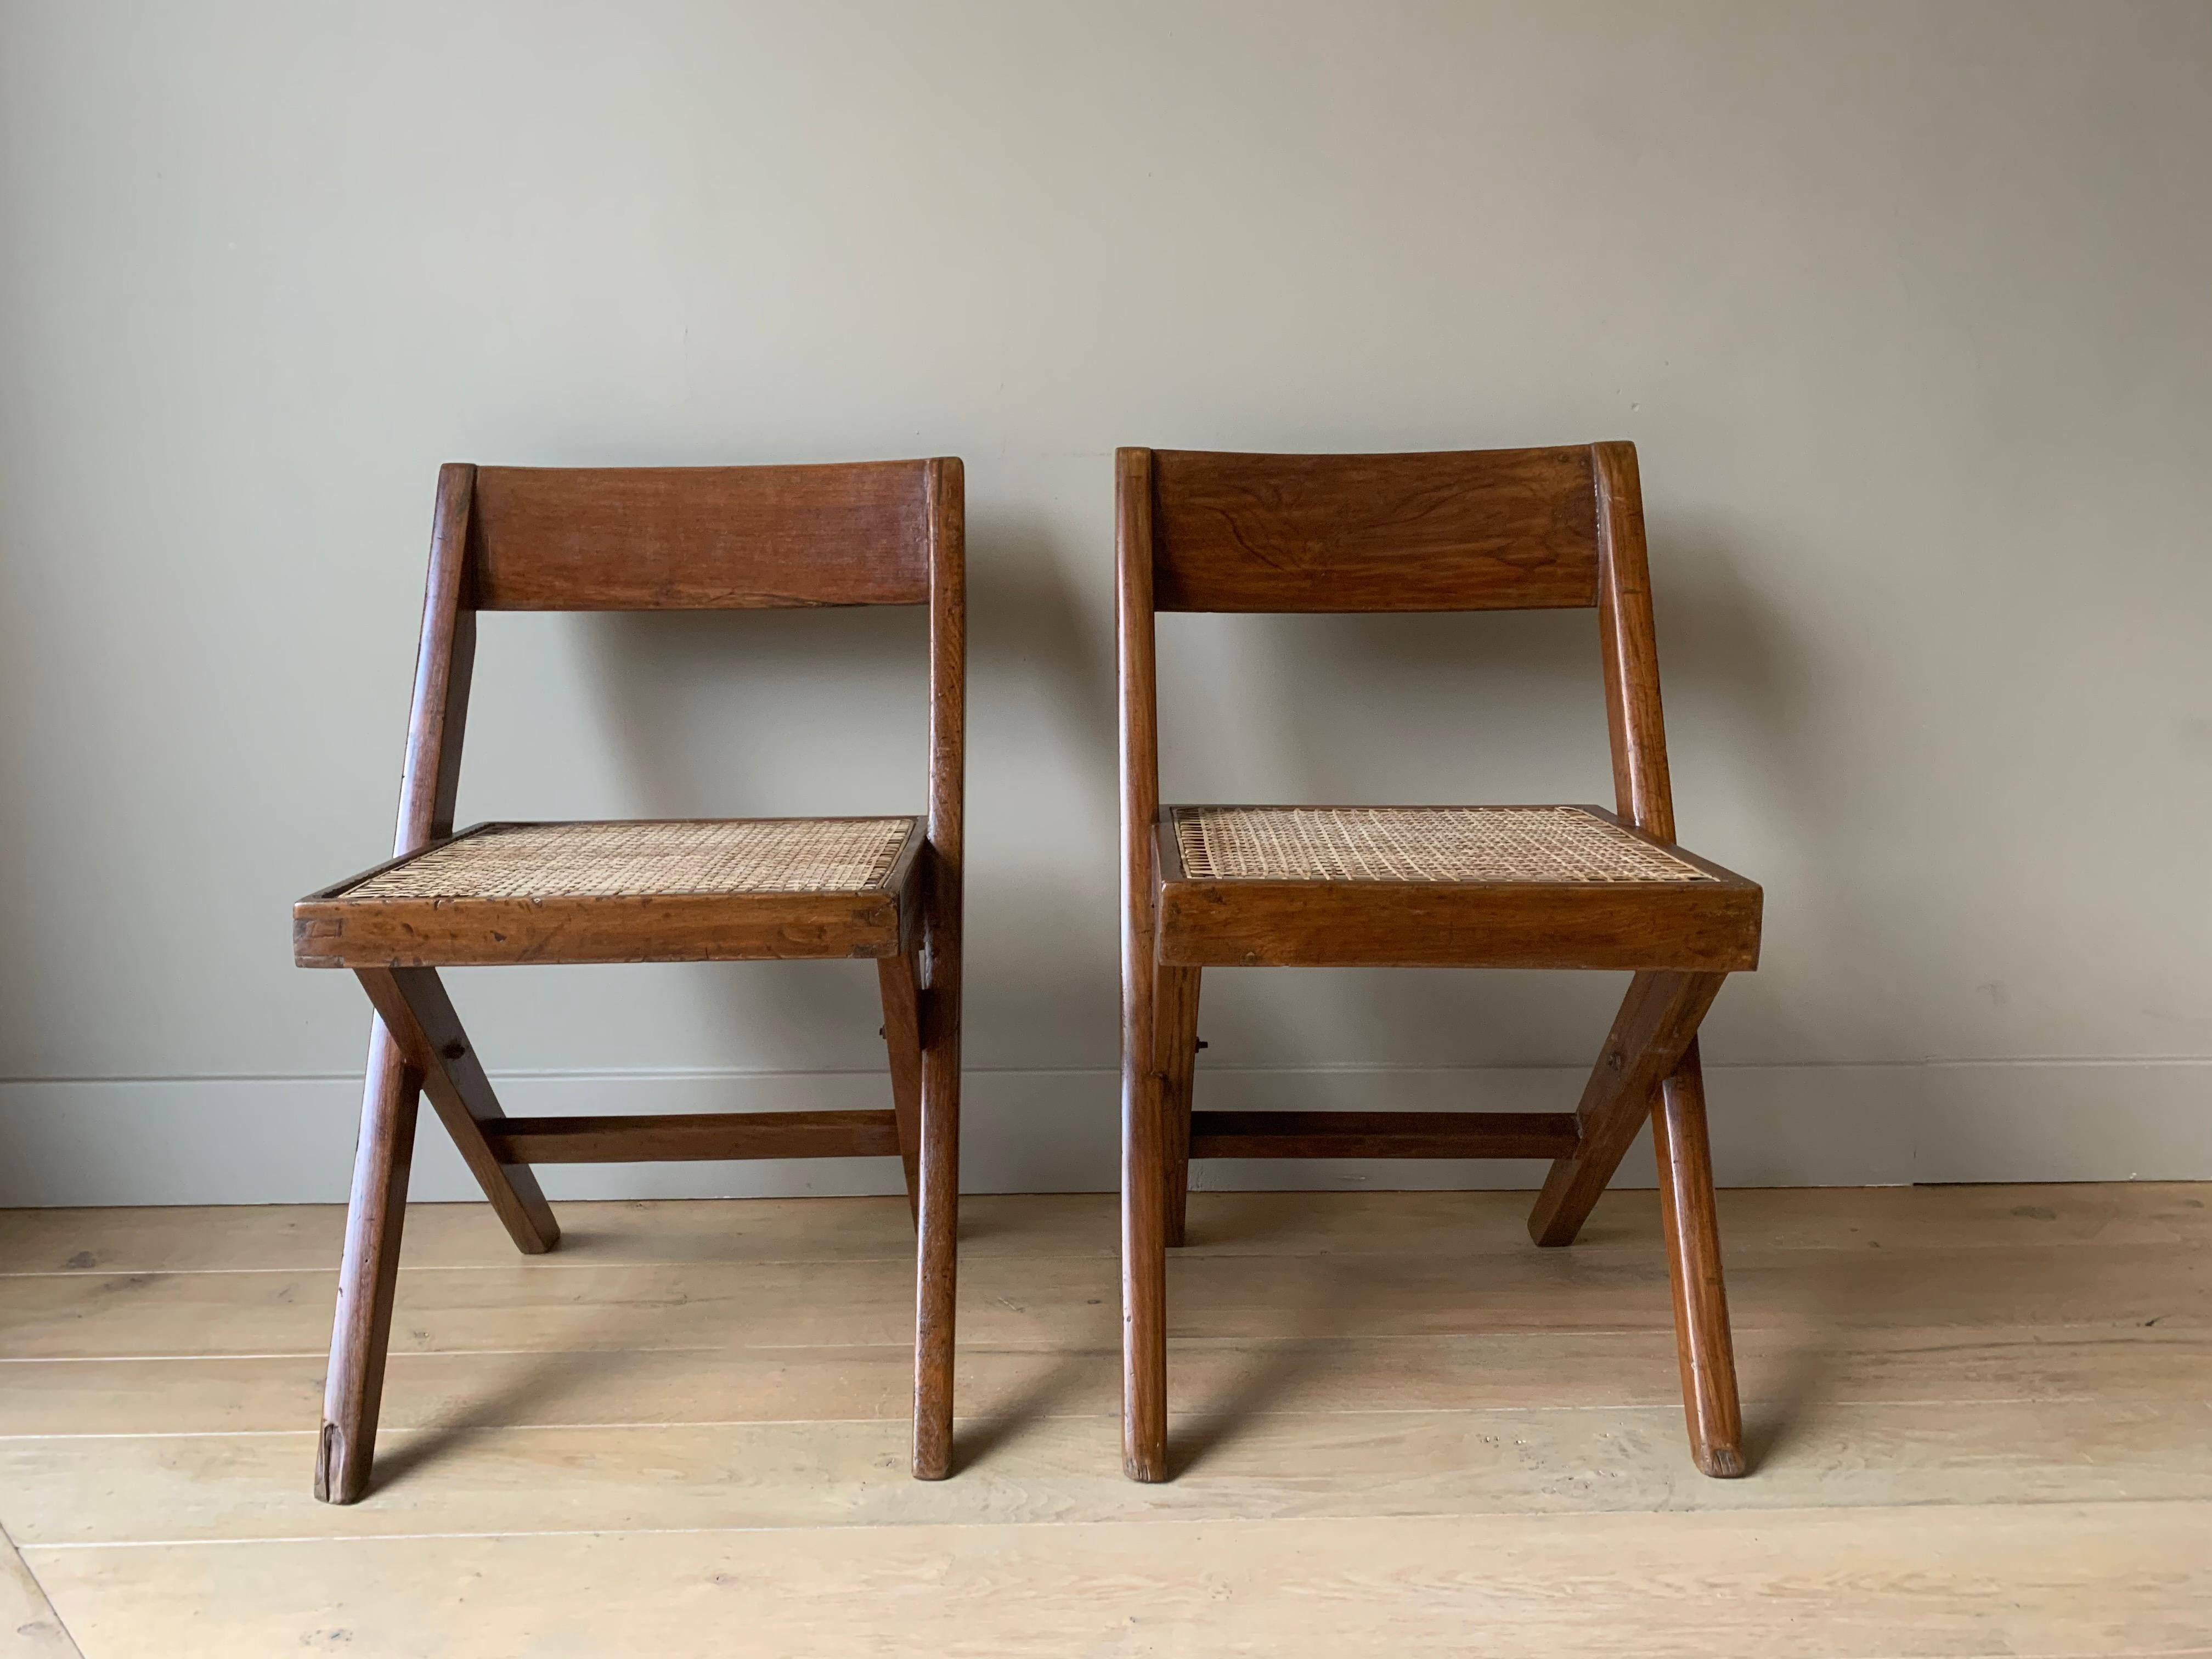 A good authentic set of two Chandigarh chairs. Artisanally and locally made with pegged solid teak and braided canework in the 1960s. This type is known as the Library chair. The x- “frame” is beautifully complemented with the convex 'banner' type